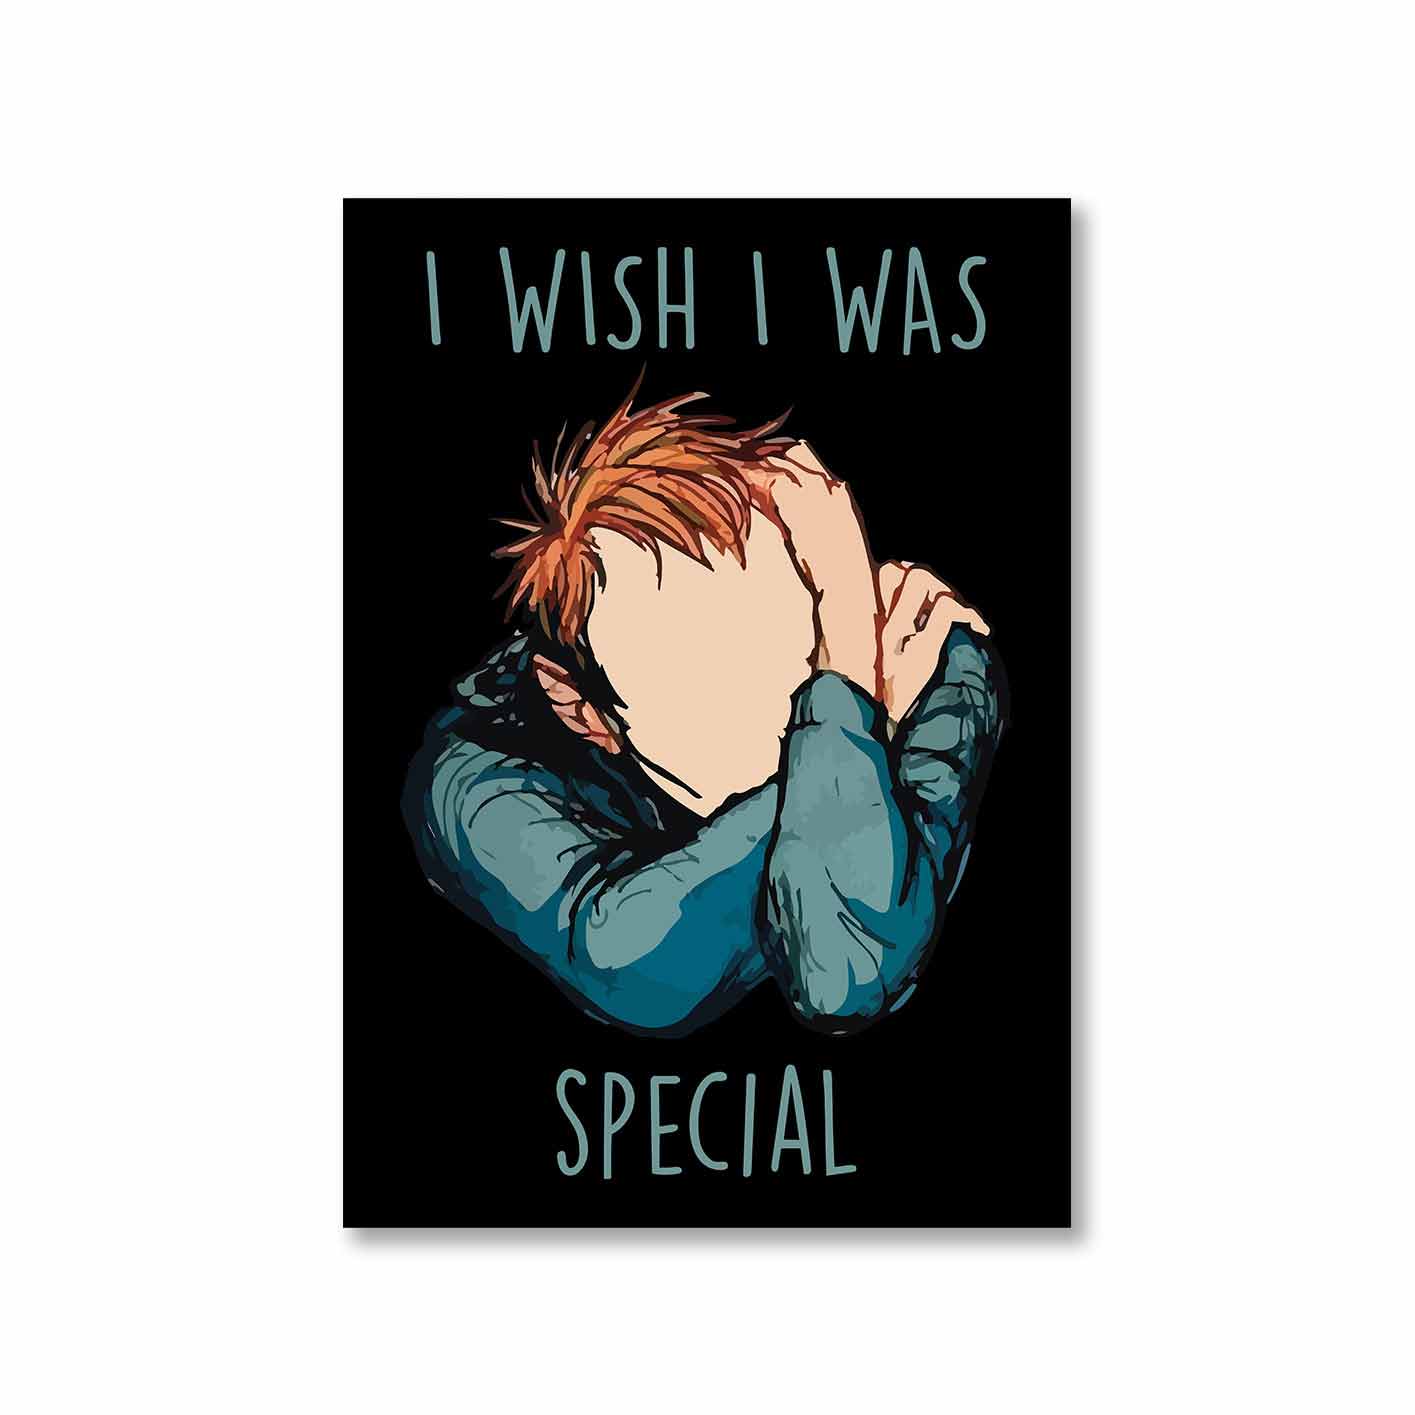 radiohead i wish i was special poster wall art buy online united states of america usa the banyan tee tbt a4